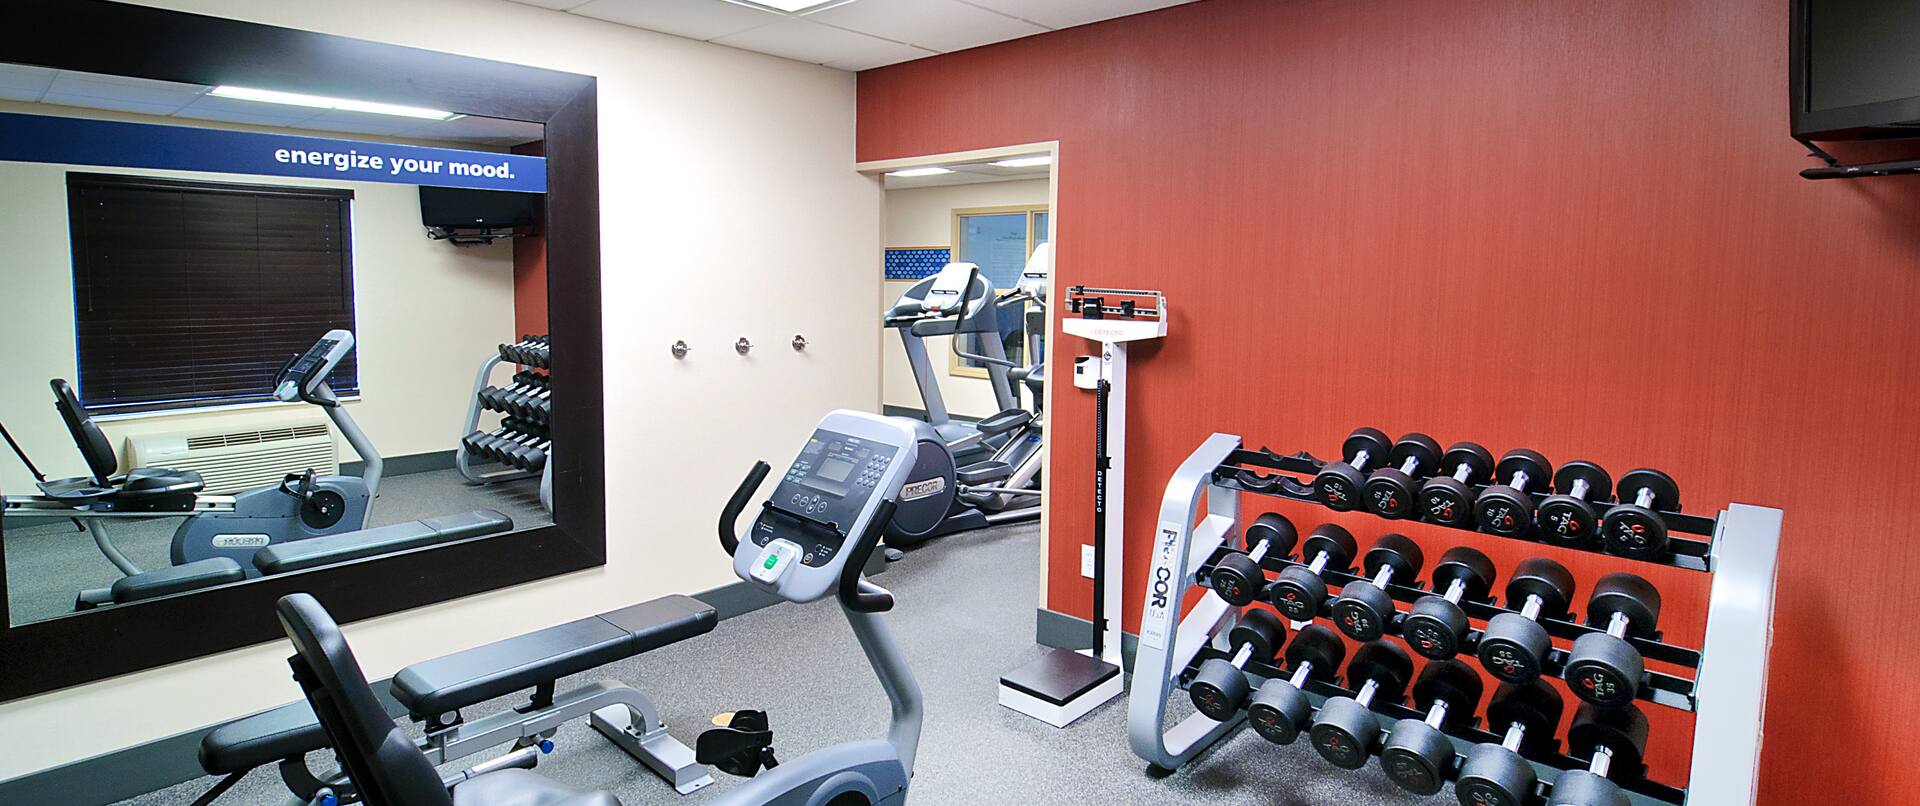 Fitness Center With Weight Bench, Free Weights, Cardio Equipment, Weight Balls, Red Stability Ball, Large Mirror and TV